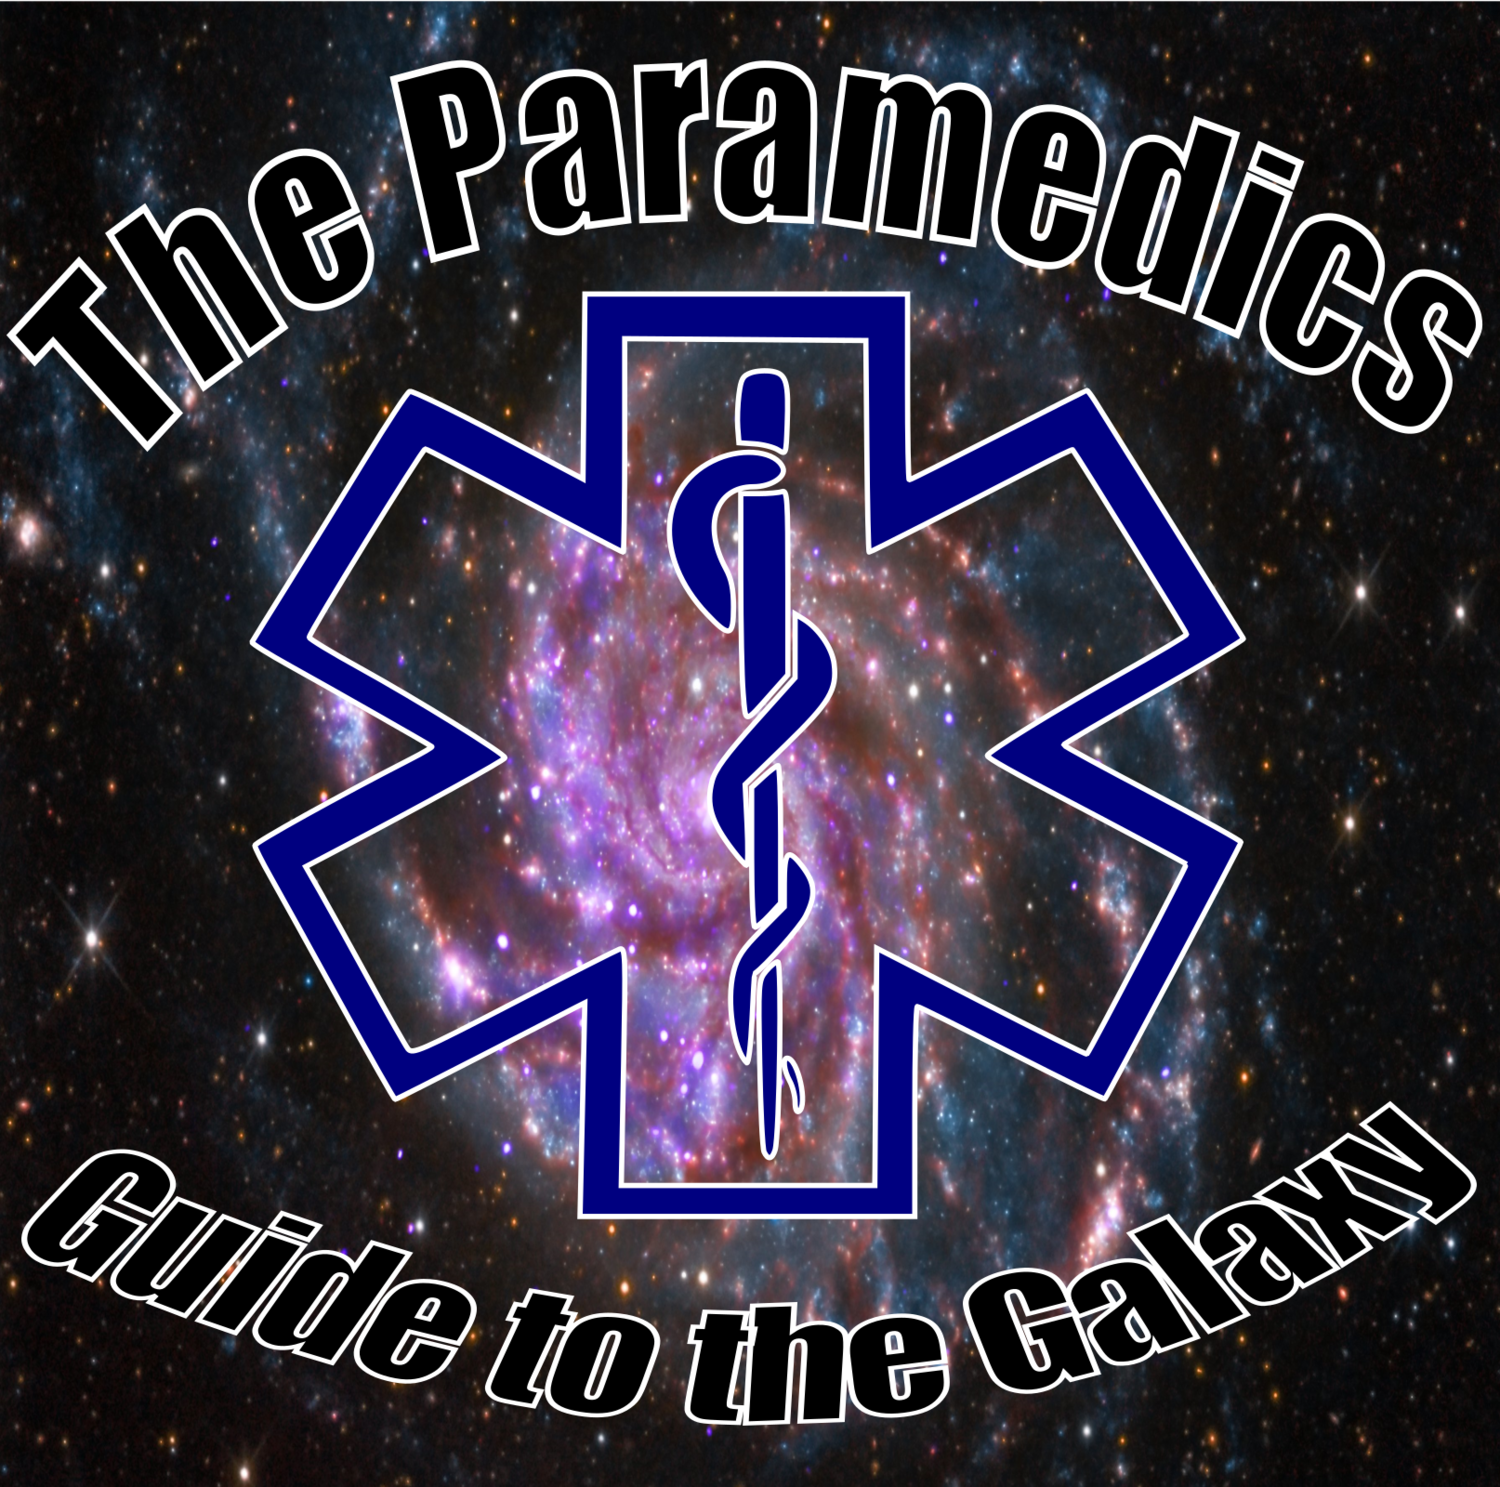 The Paramedics Guide to the Galaxy